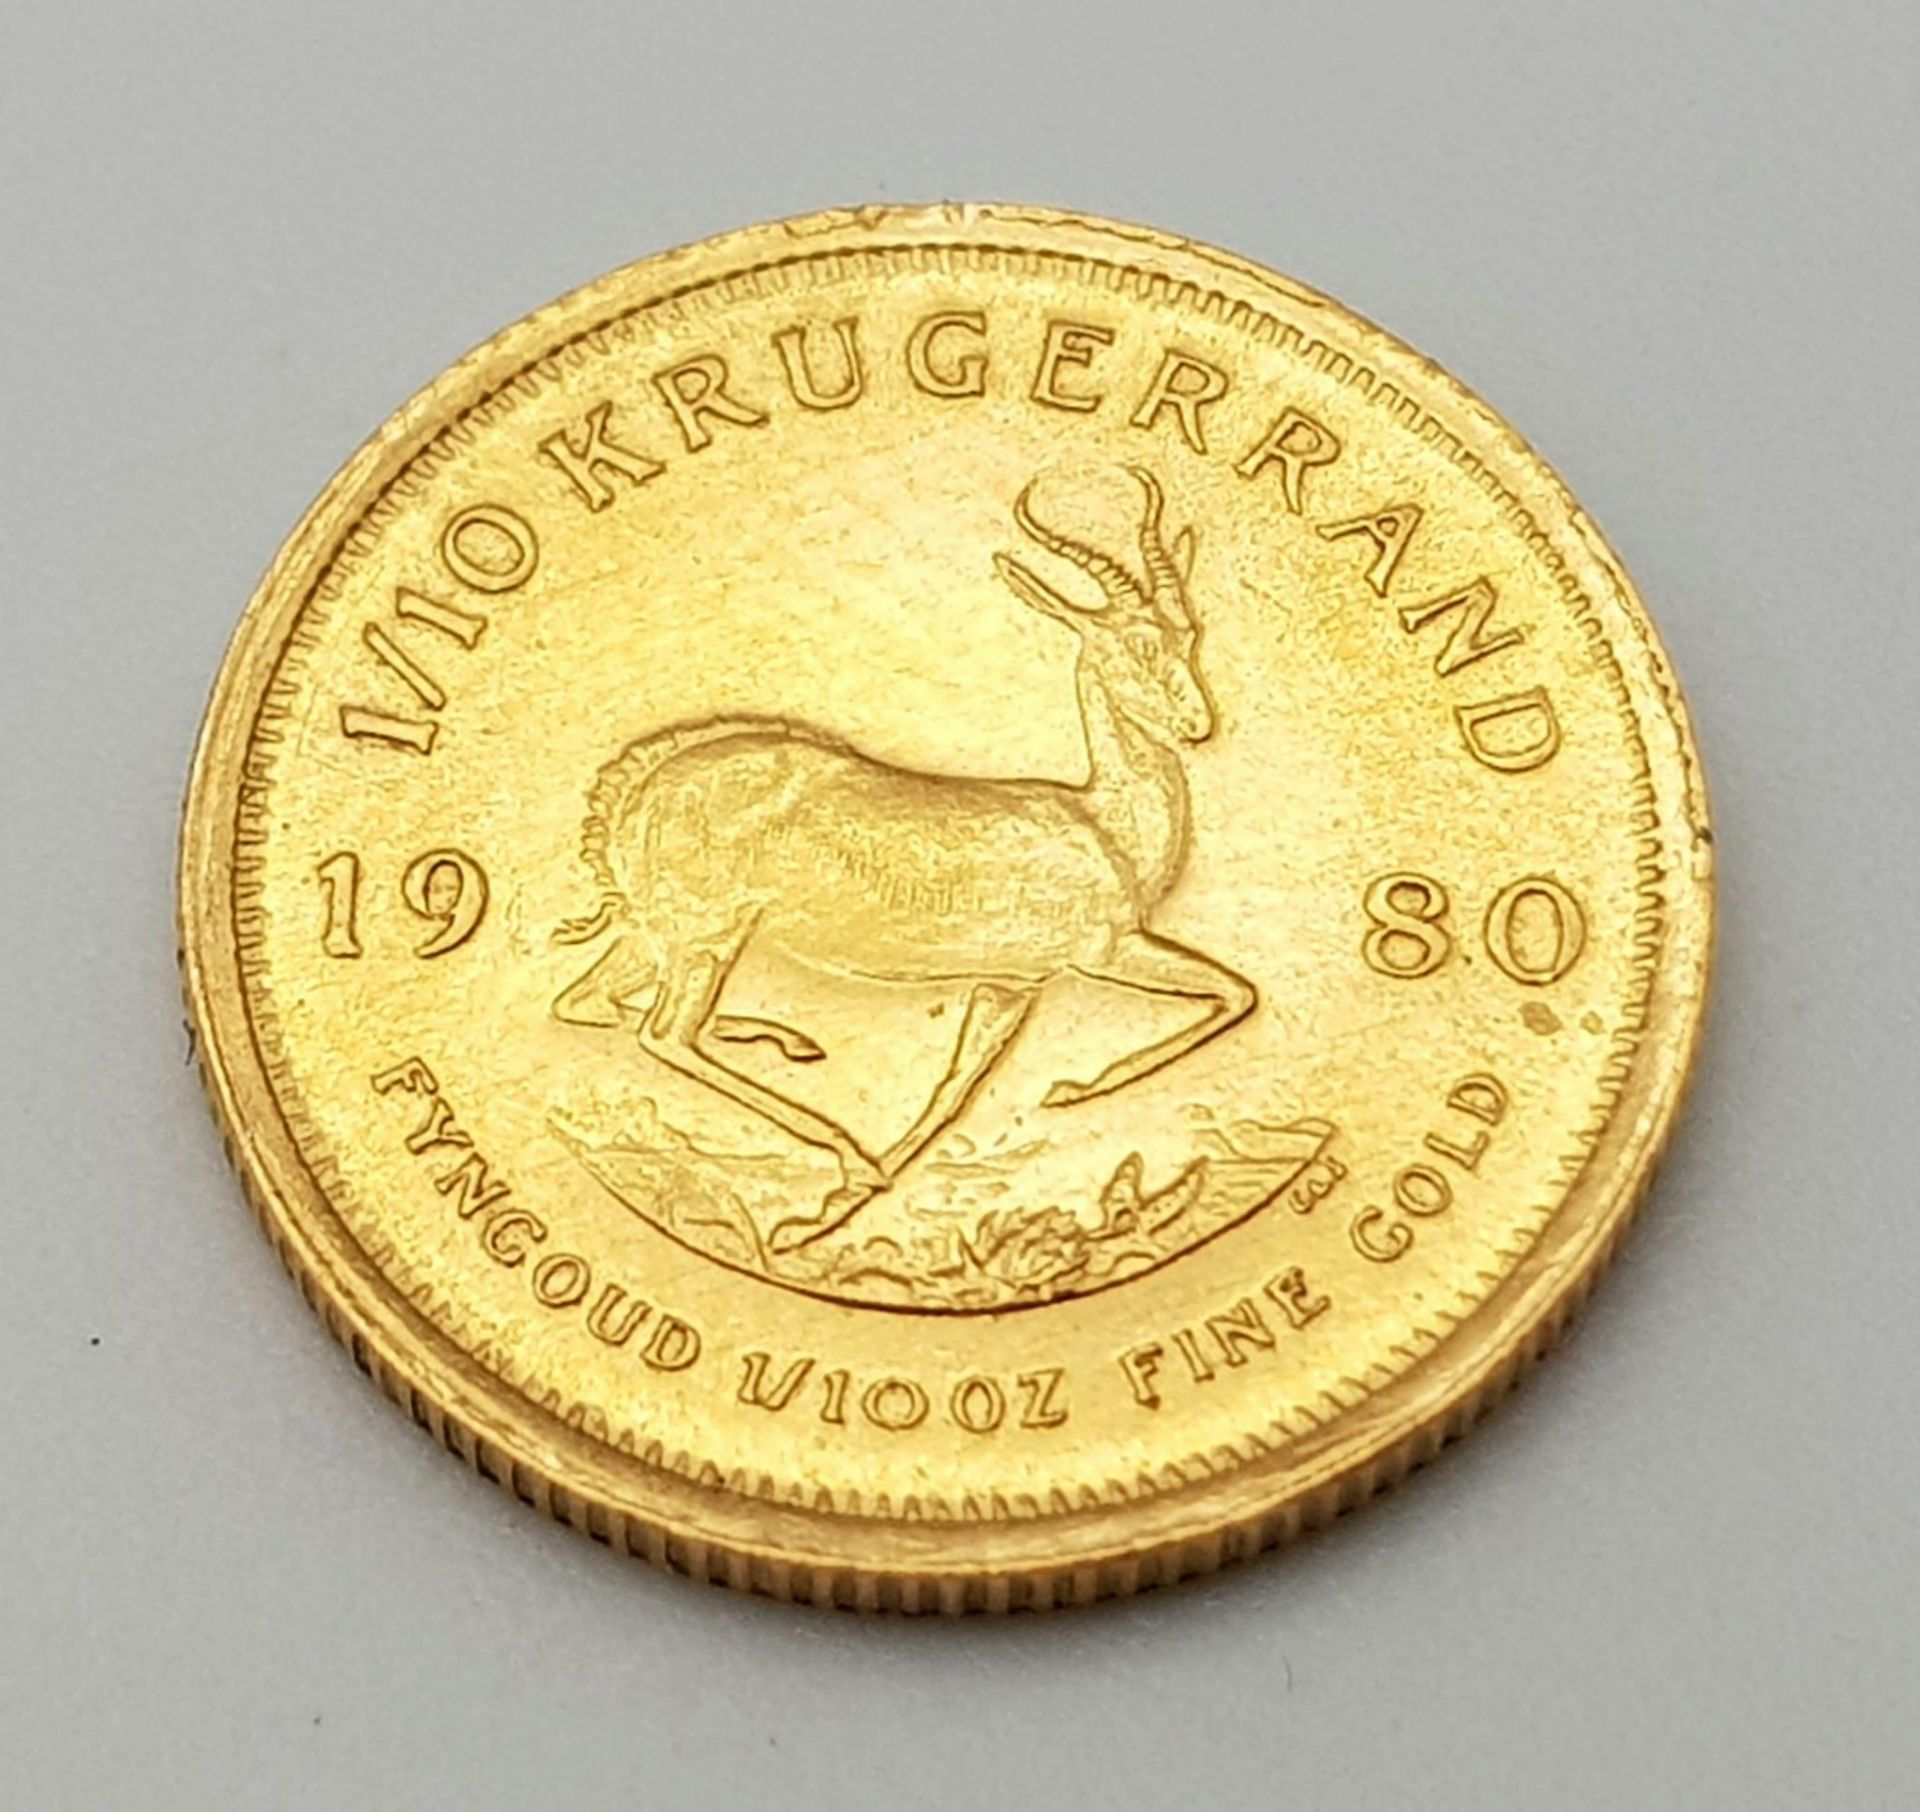 A 1/10 Ounce 22k Gold Krugerrand Coin. - Image 2 of 4